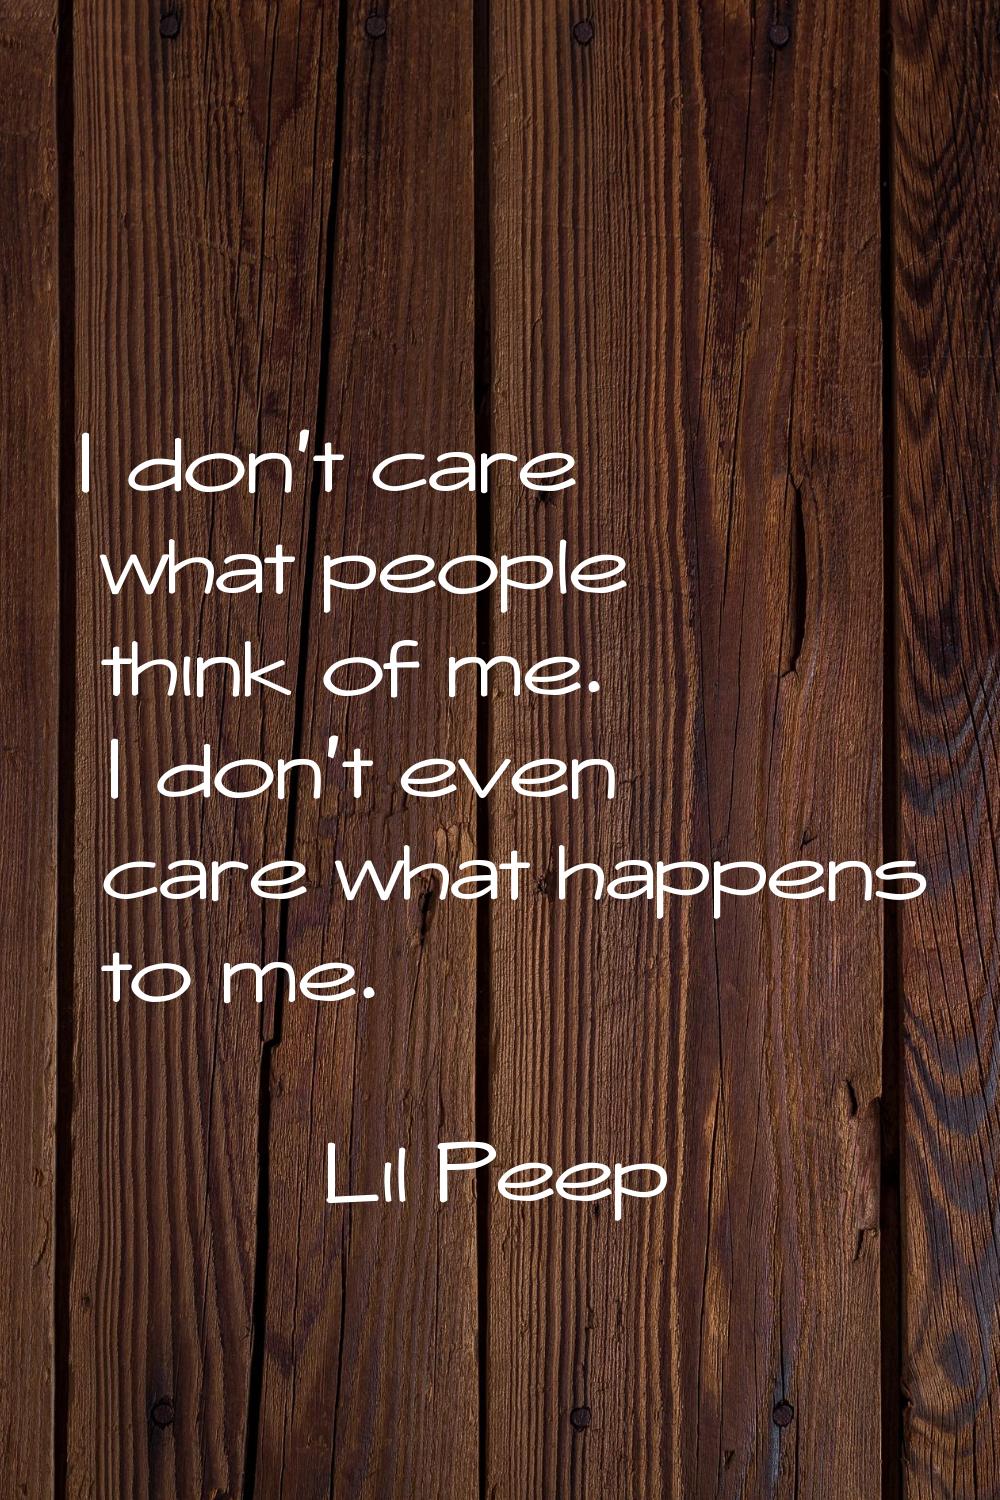 I don't care what people think of me. I don't even care what happens to me.